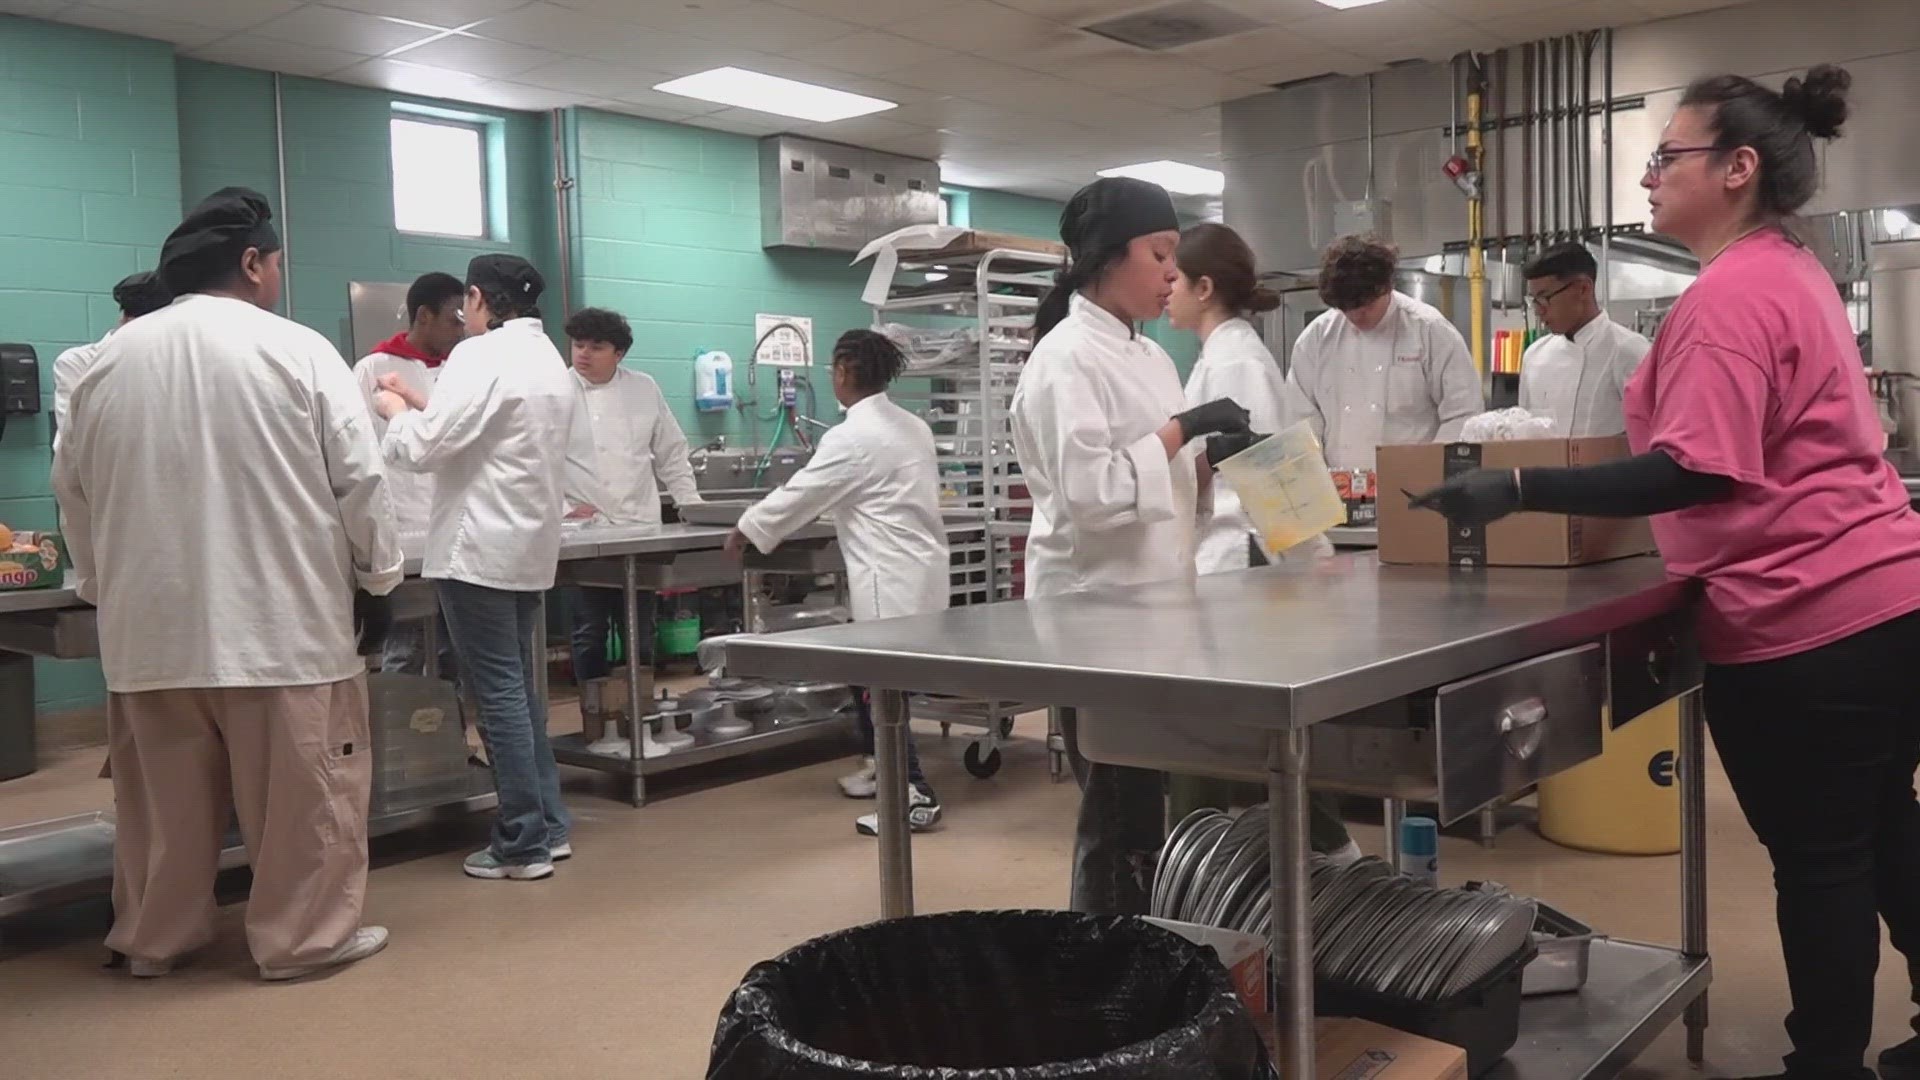 For three years in a row, ECISD has hired some of its culinary arts students to prepare and cater food for the annual event.